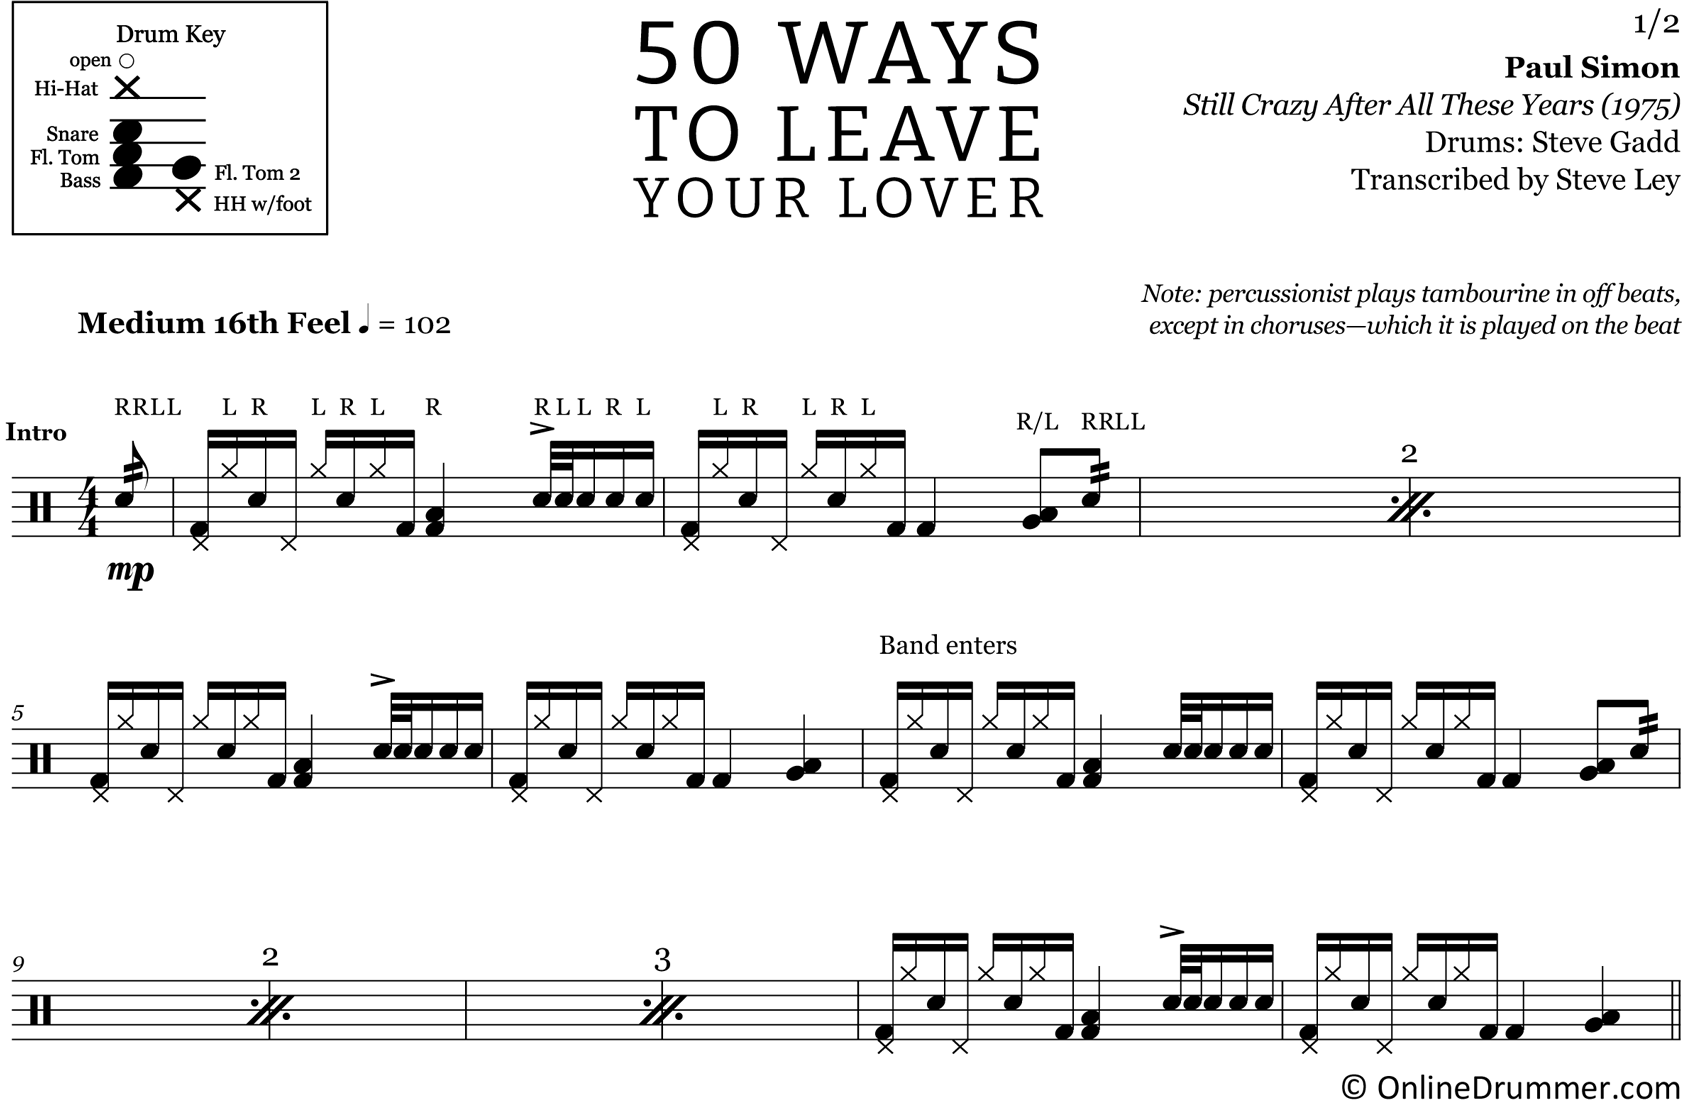 50 Ways To Leave Your Lover - Paul Simon - Drum Sheet Music